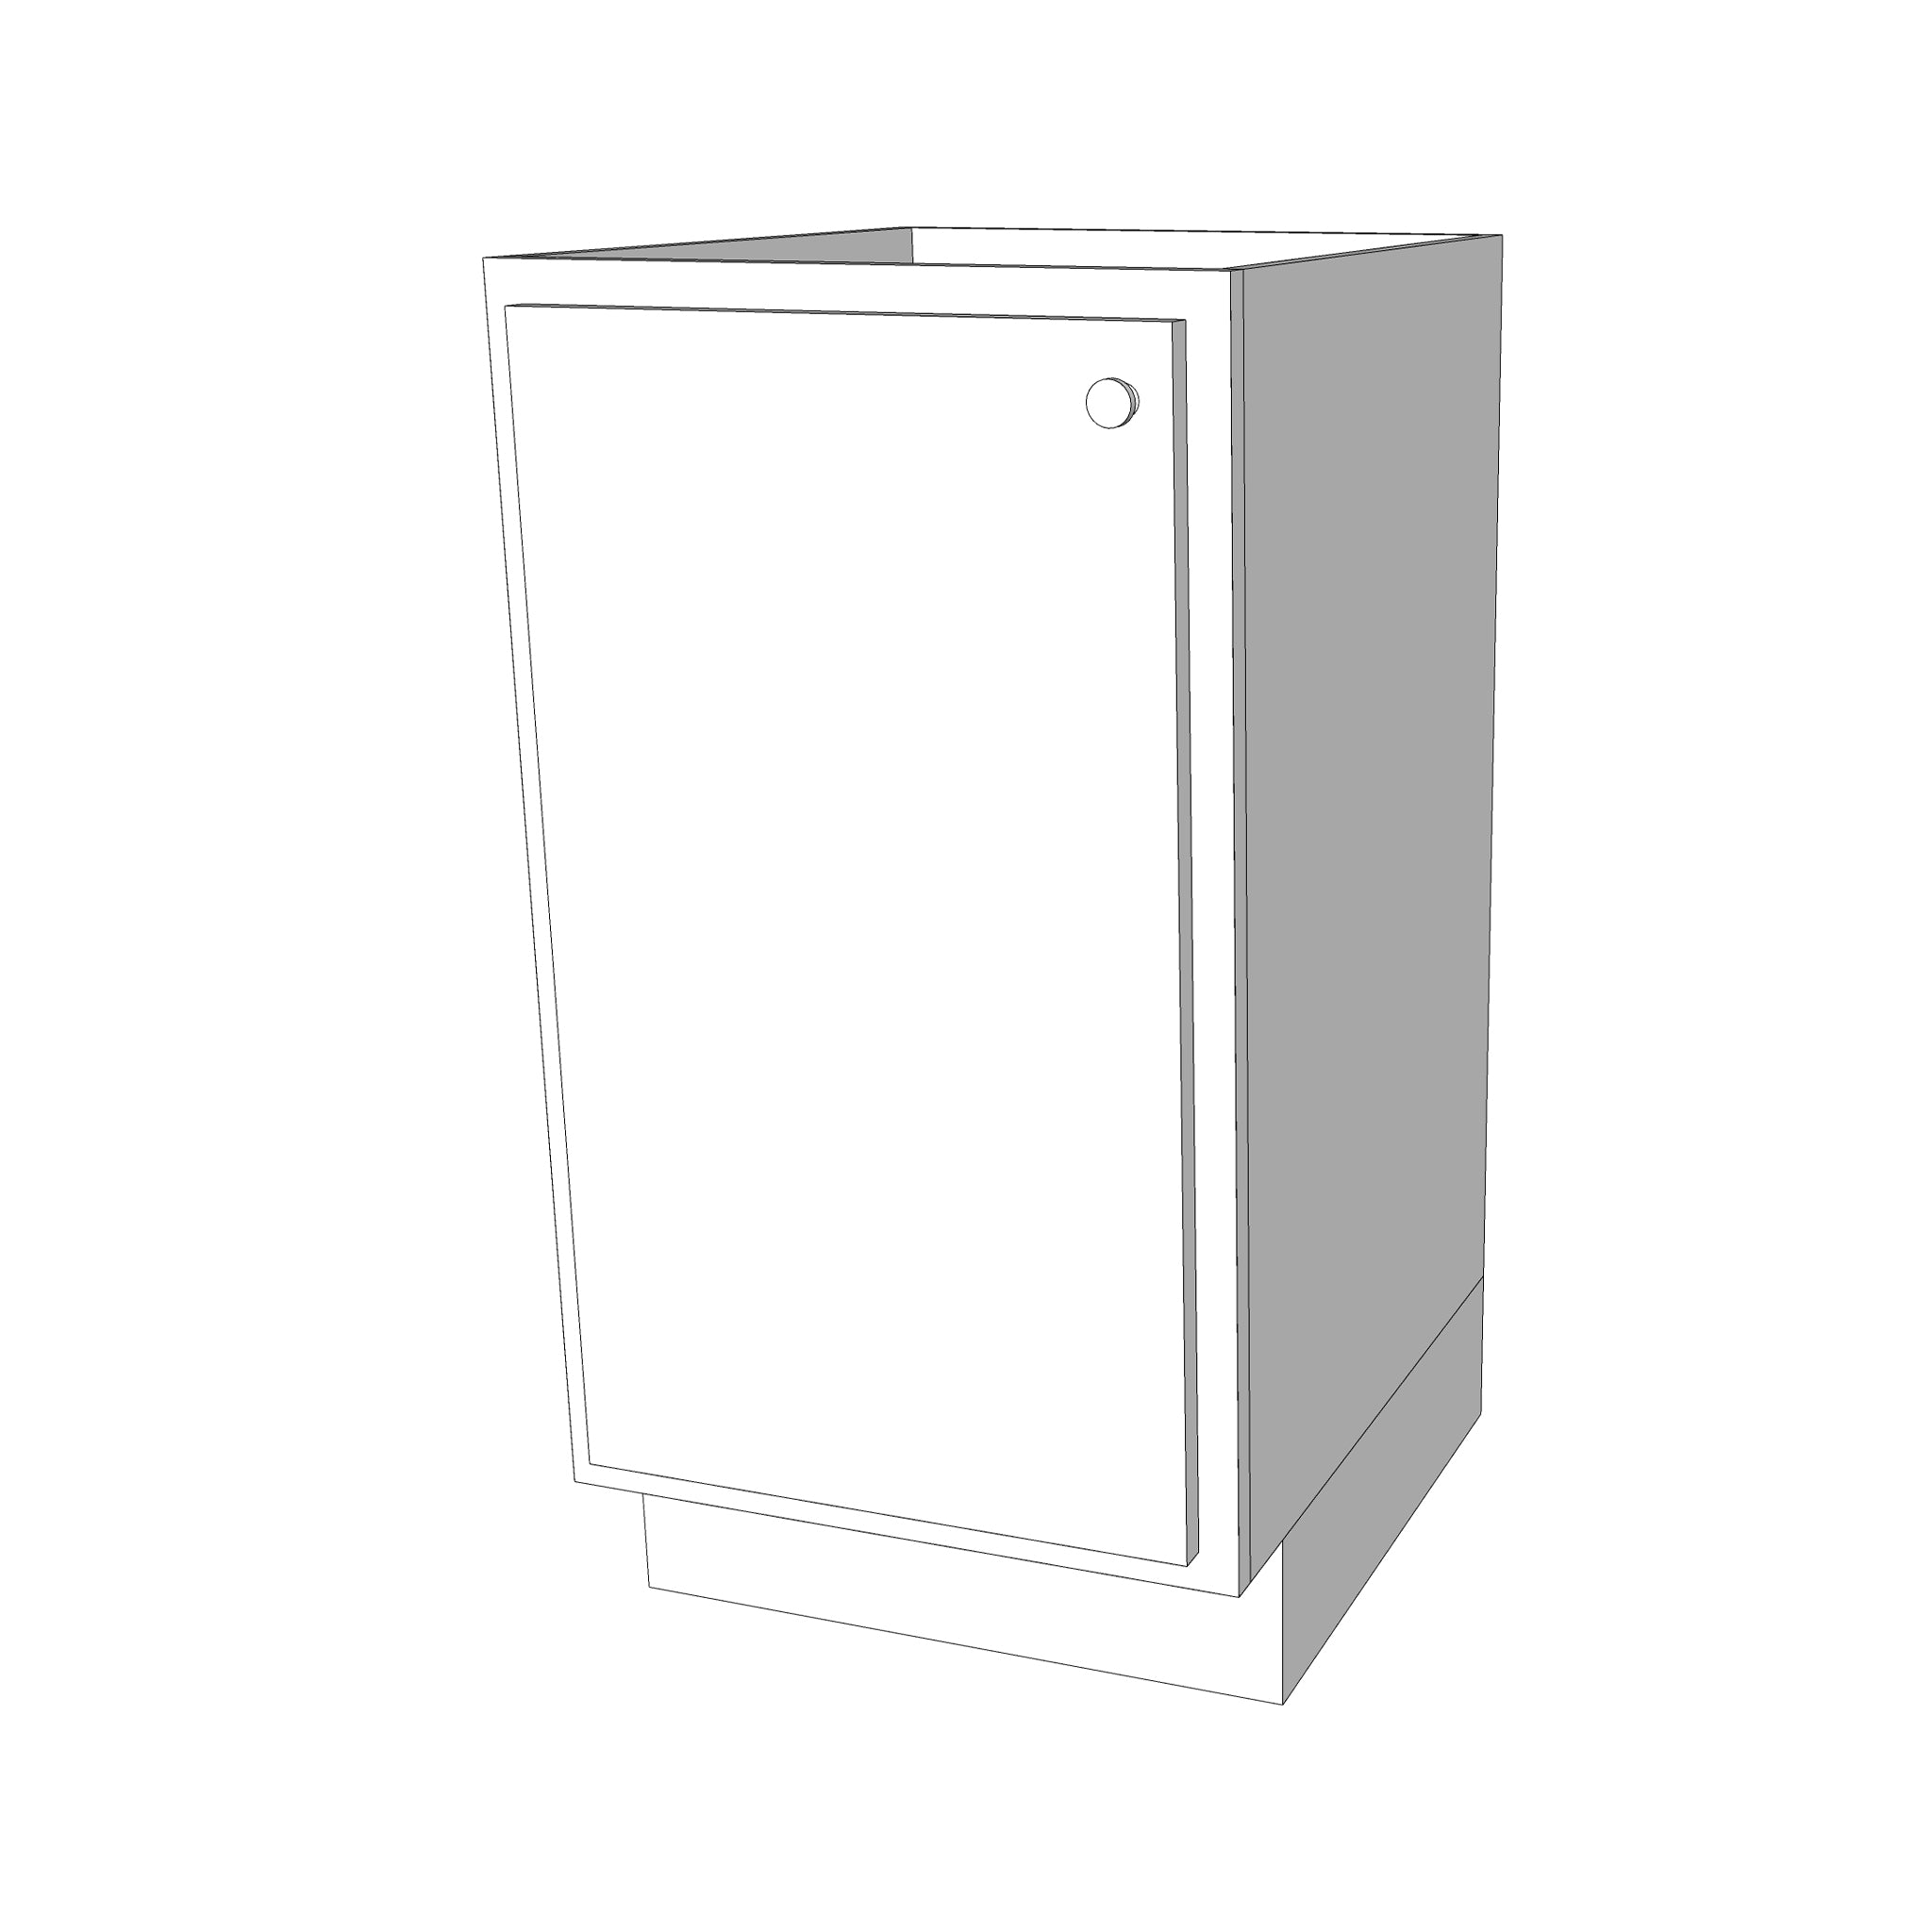 12x30 Full Height Vanity Base Cabinet - Assembled